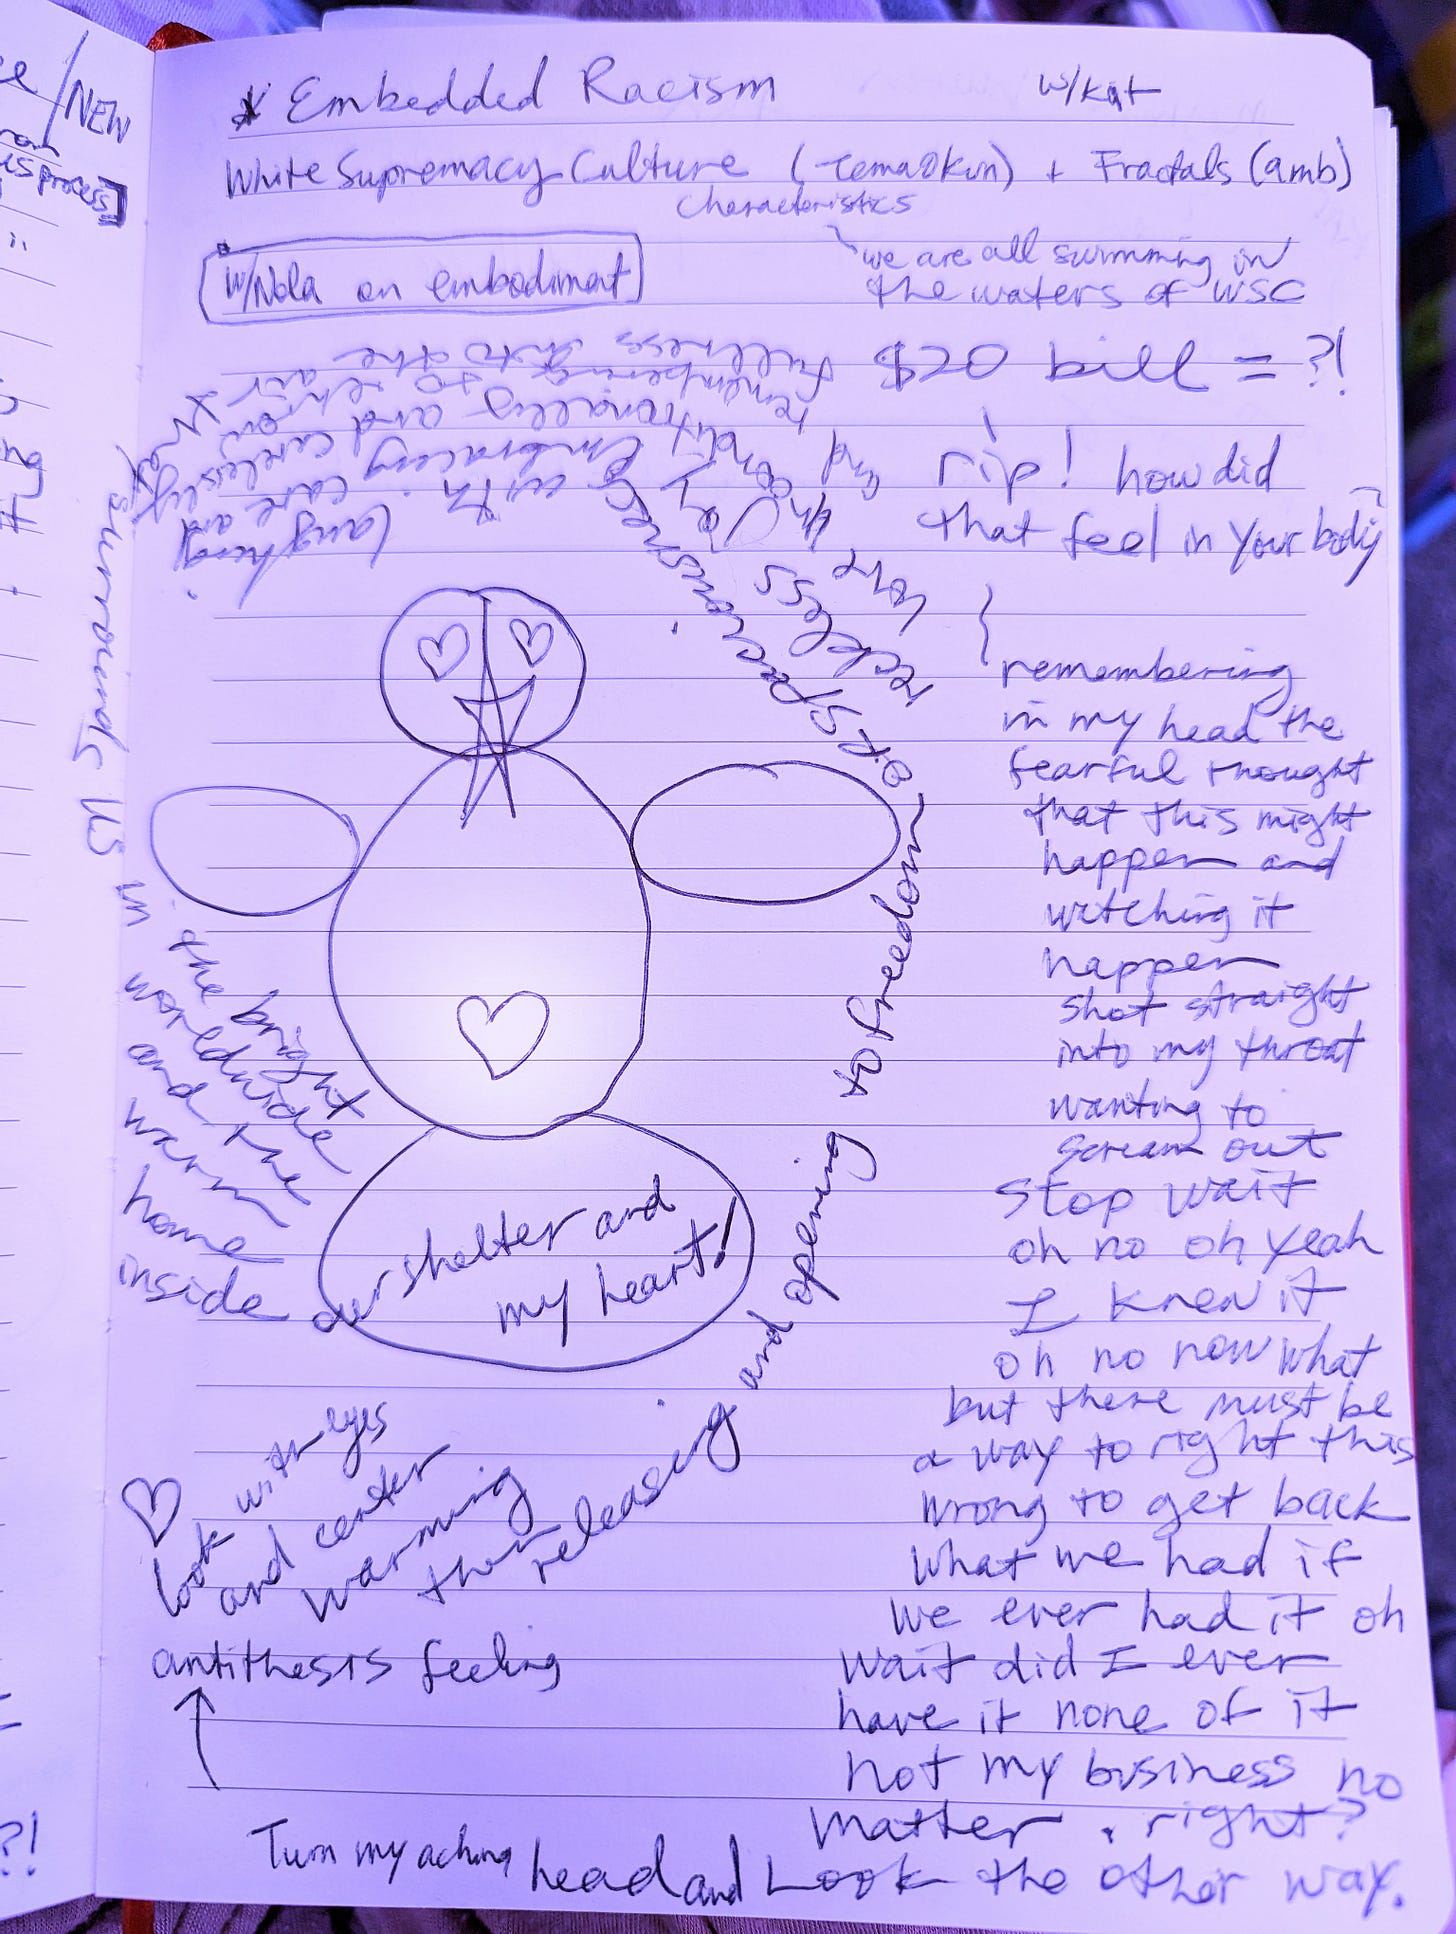 photo of journal page with sketch of a body with a heart at its belly and writing all around it